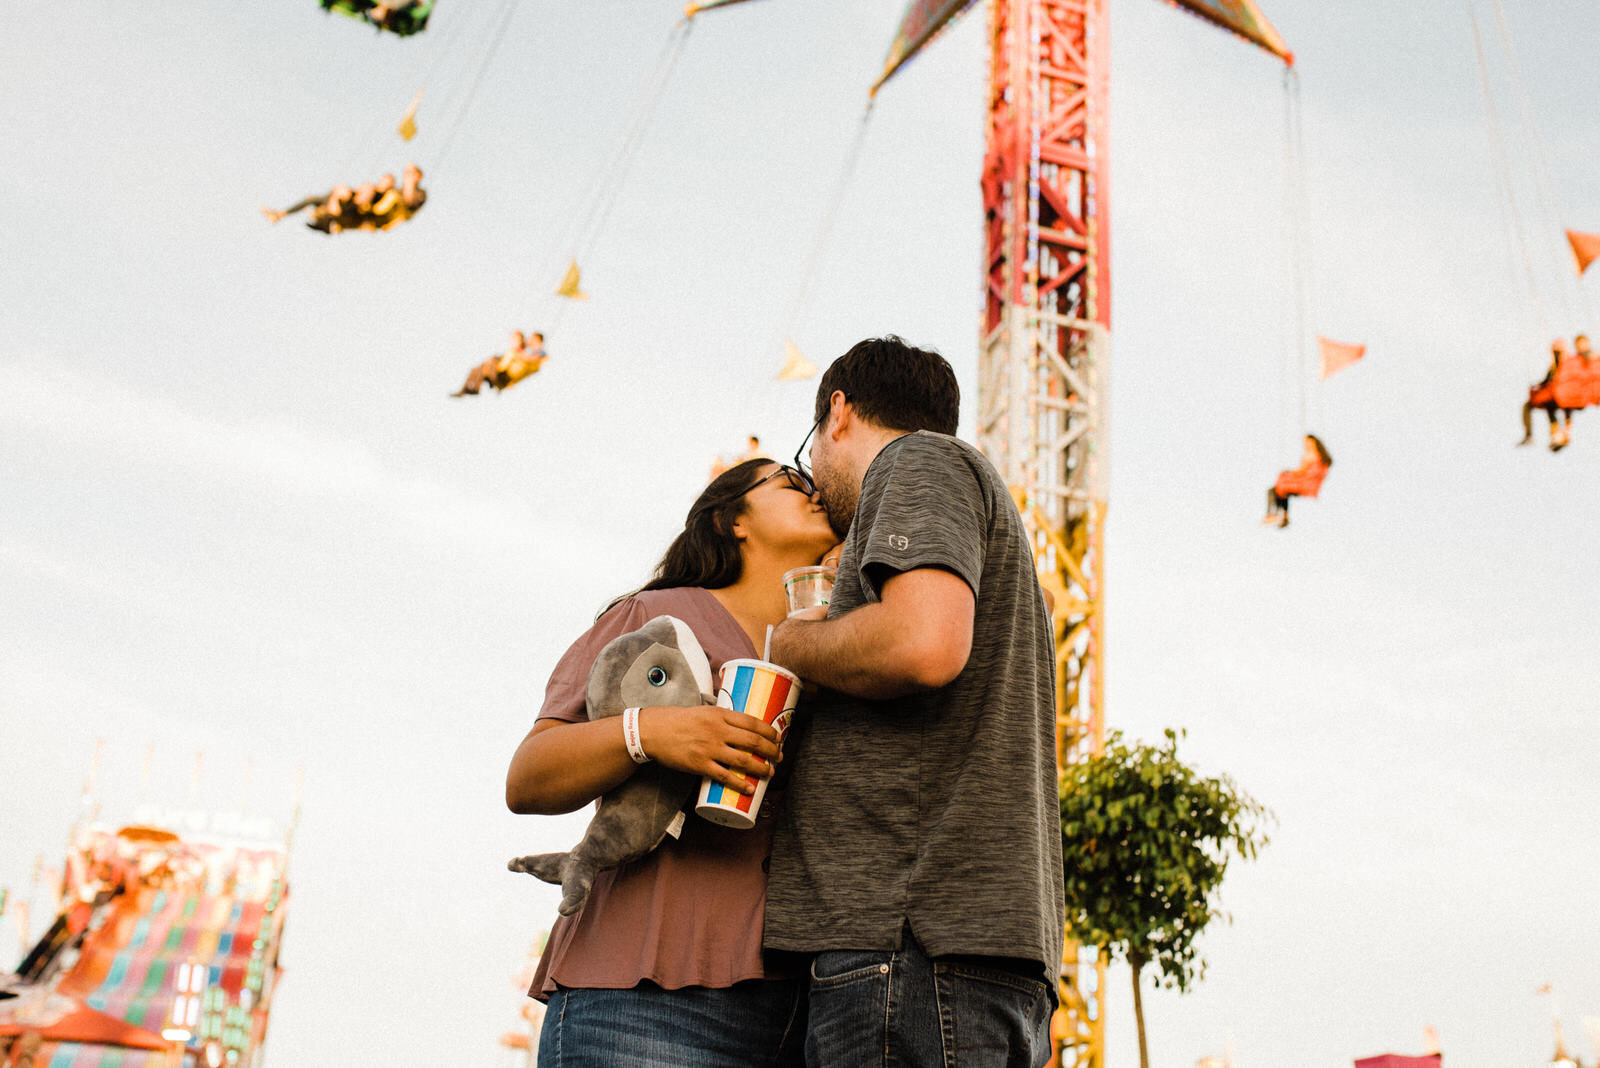 Fun engagement photos with carnival swings at the Orange County Fair